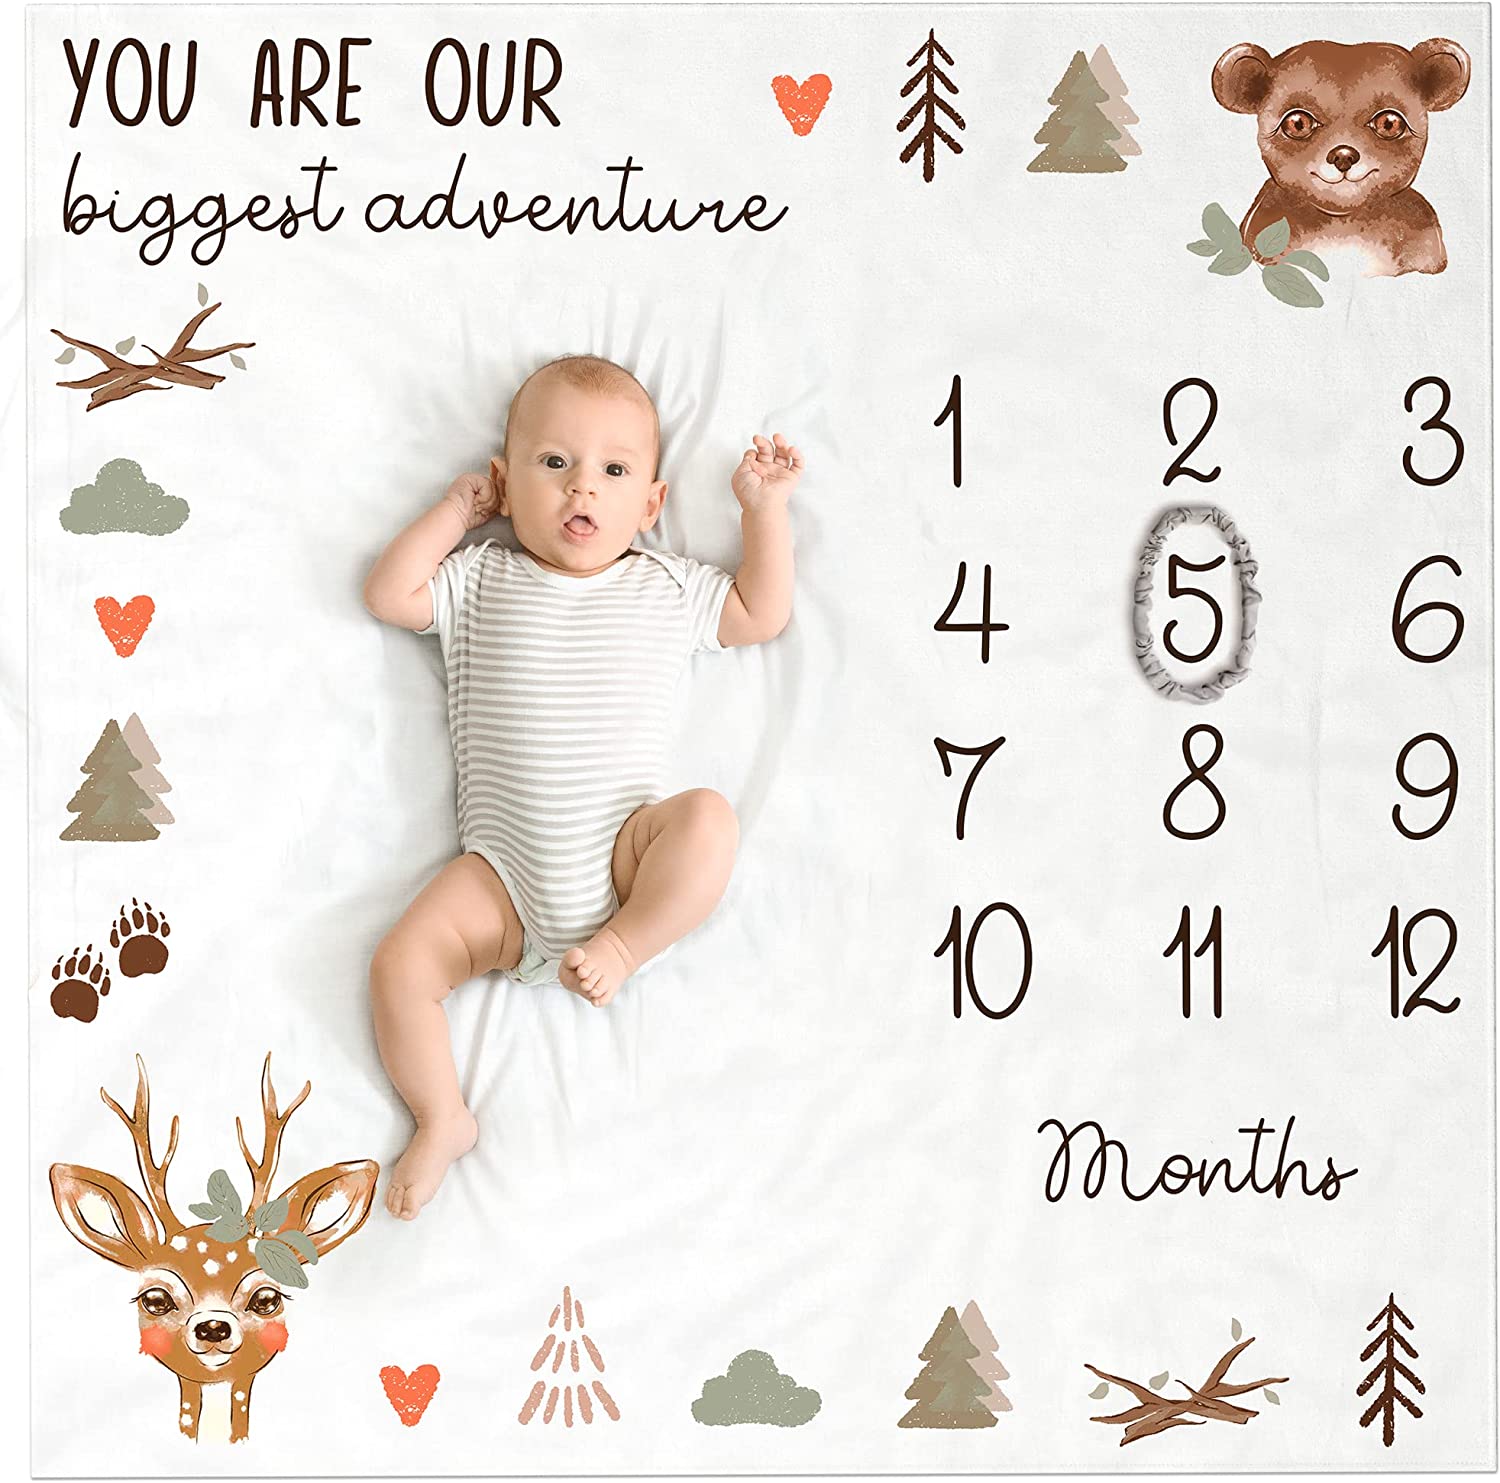 Modern Baby Milestone Blanket - Beautiful Woodland Friends Design for Personalized Monthly Baby Pictures - Cherish Your Adorable Babys Boy Or Girl Milestones Forever